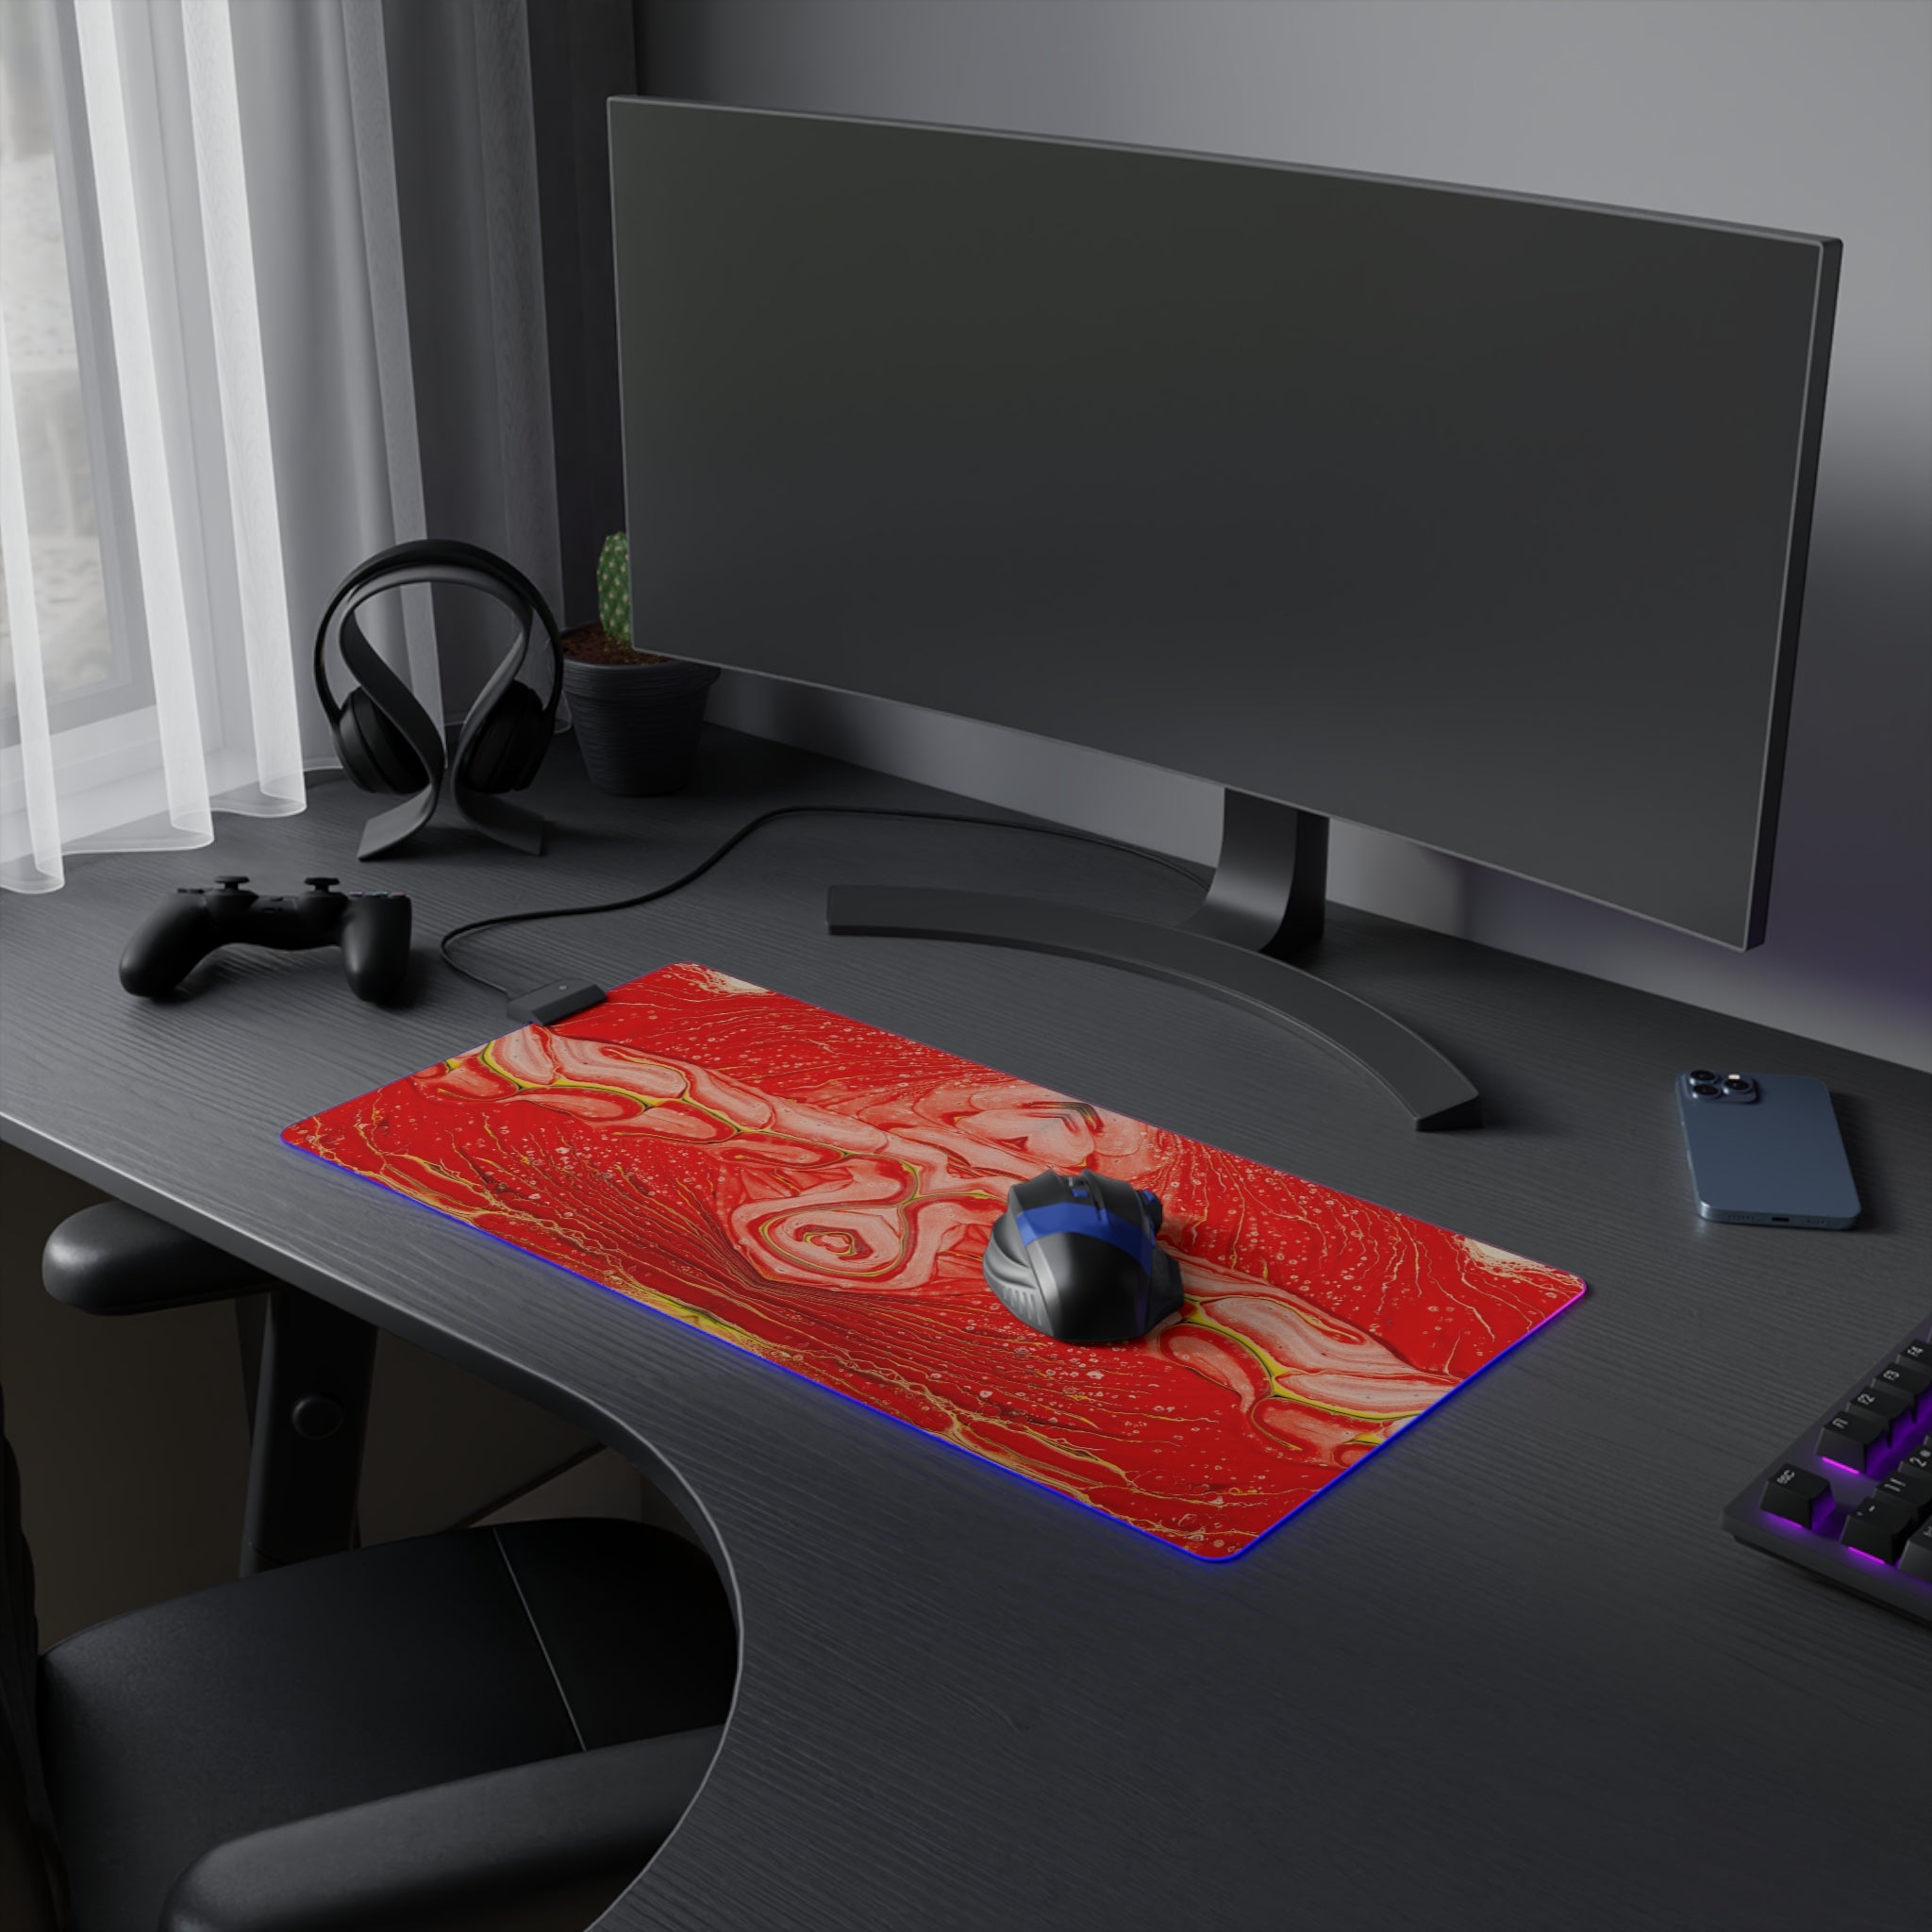 Cameron Creations - LED Gaming Mouse Pad - Galactica Organis - Concept 4